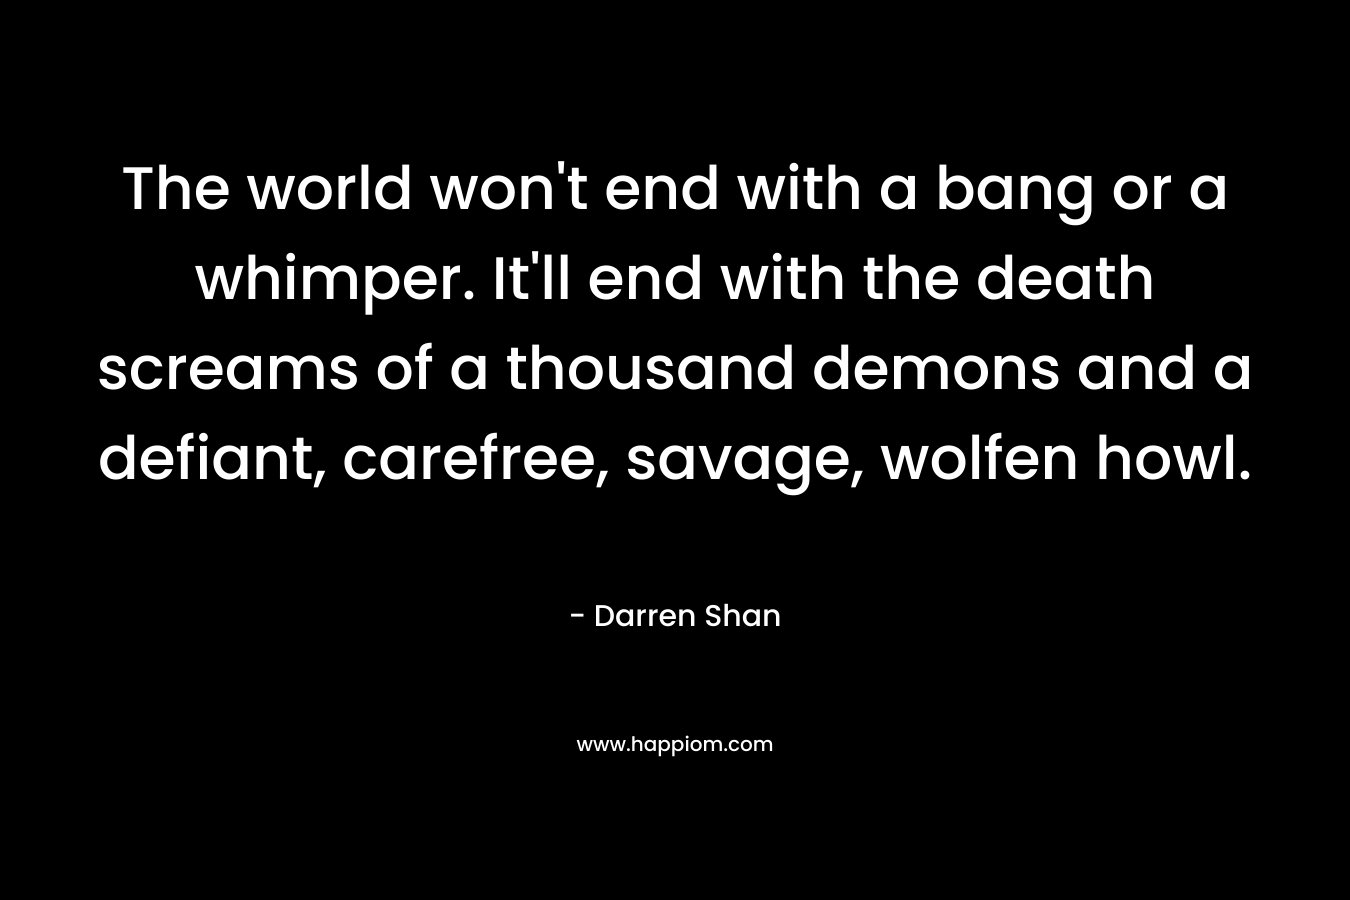 The world won’t end with a bang or a whimper. It’ll end with the death screams of a thousand demons and a defiant, carefree, savage, wolfen howl. – Darren Shan